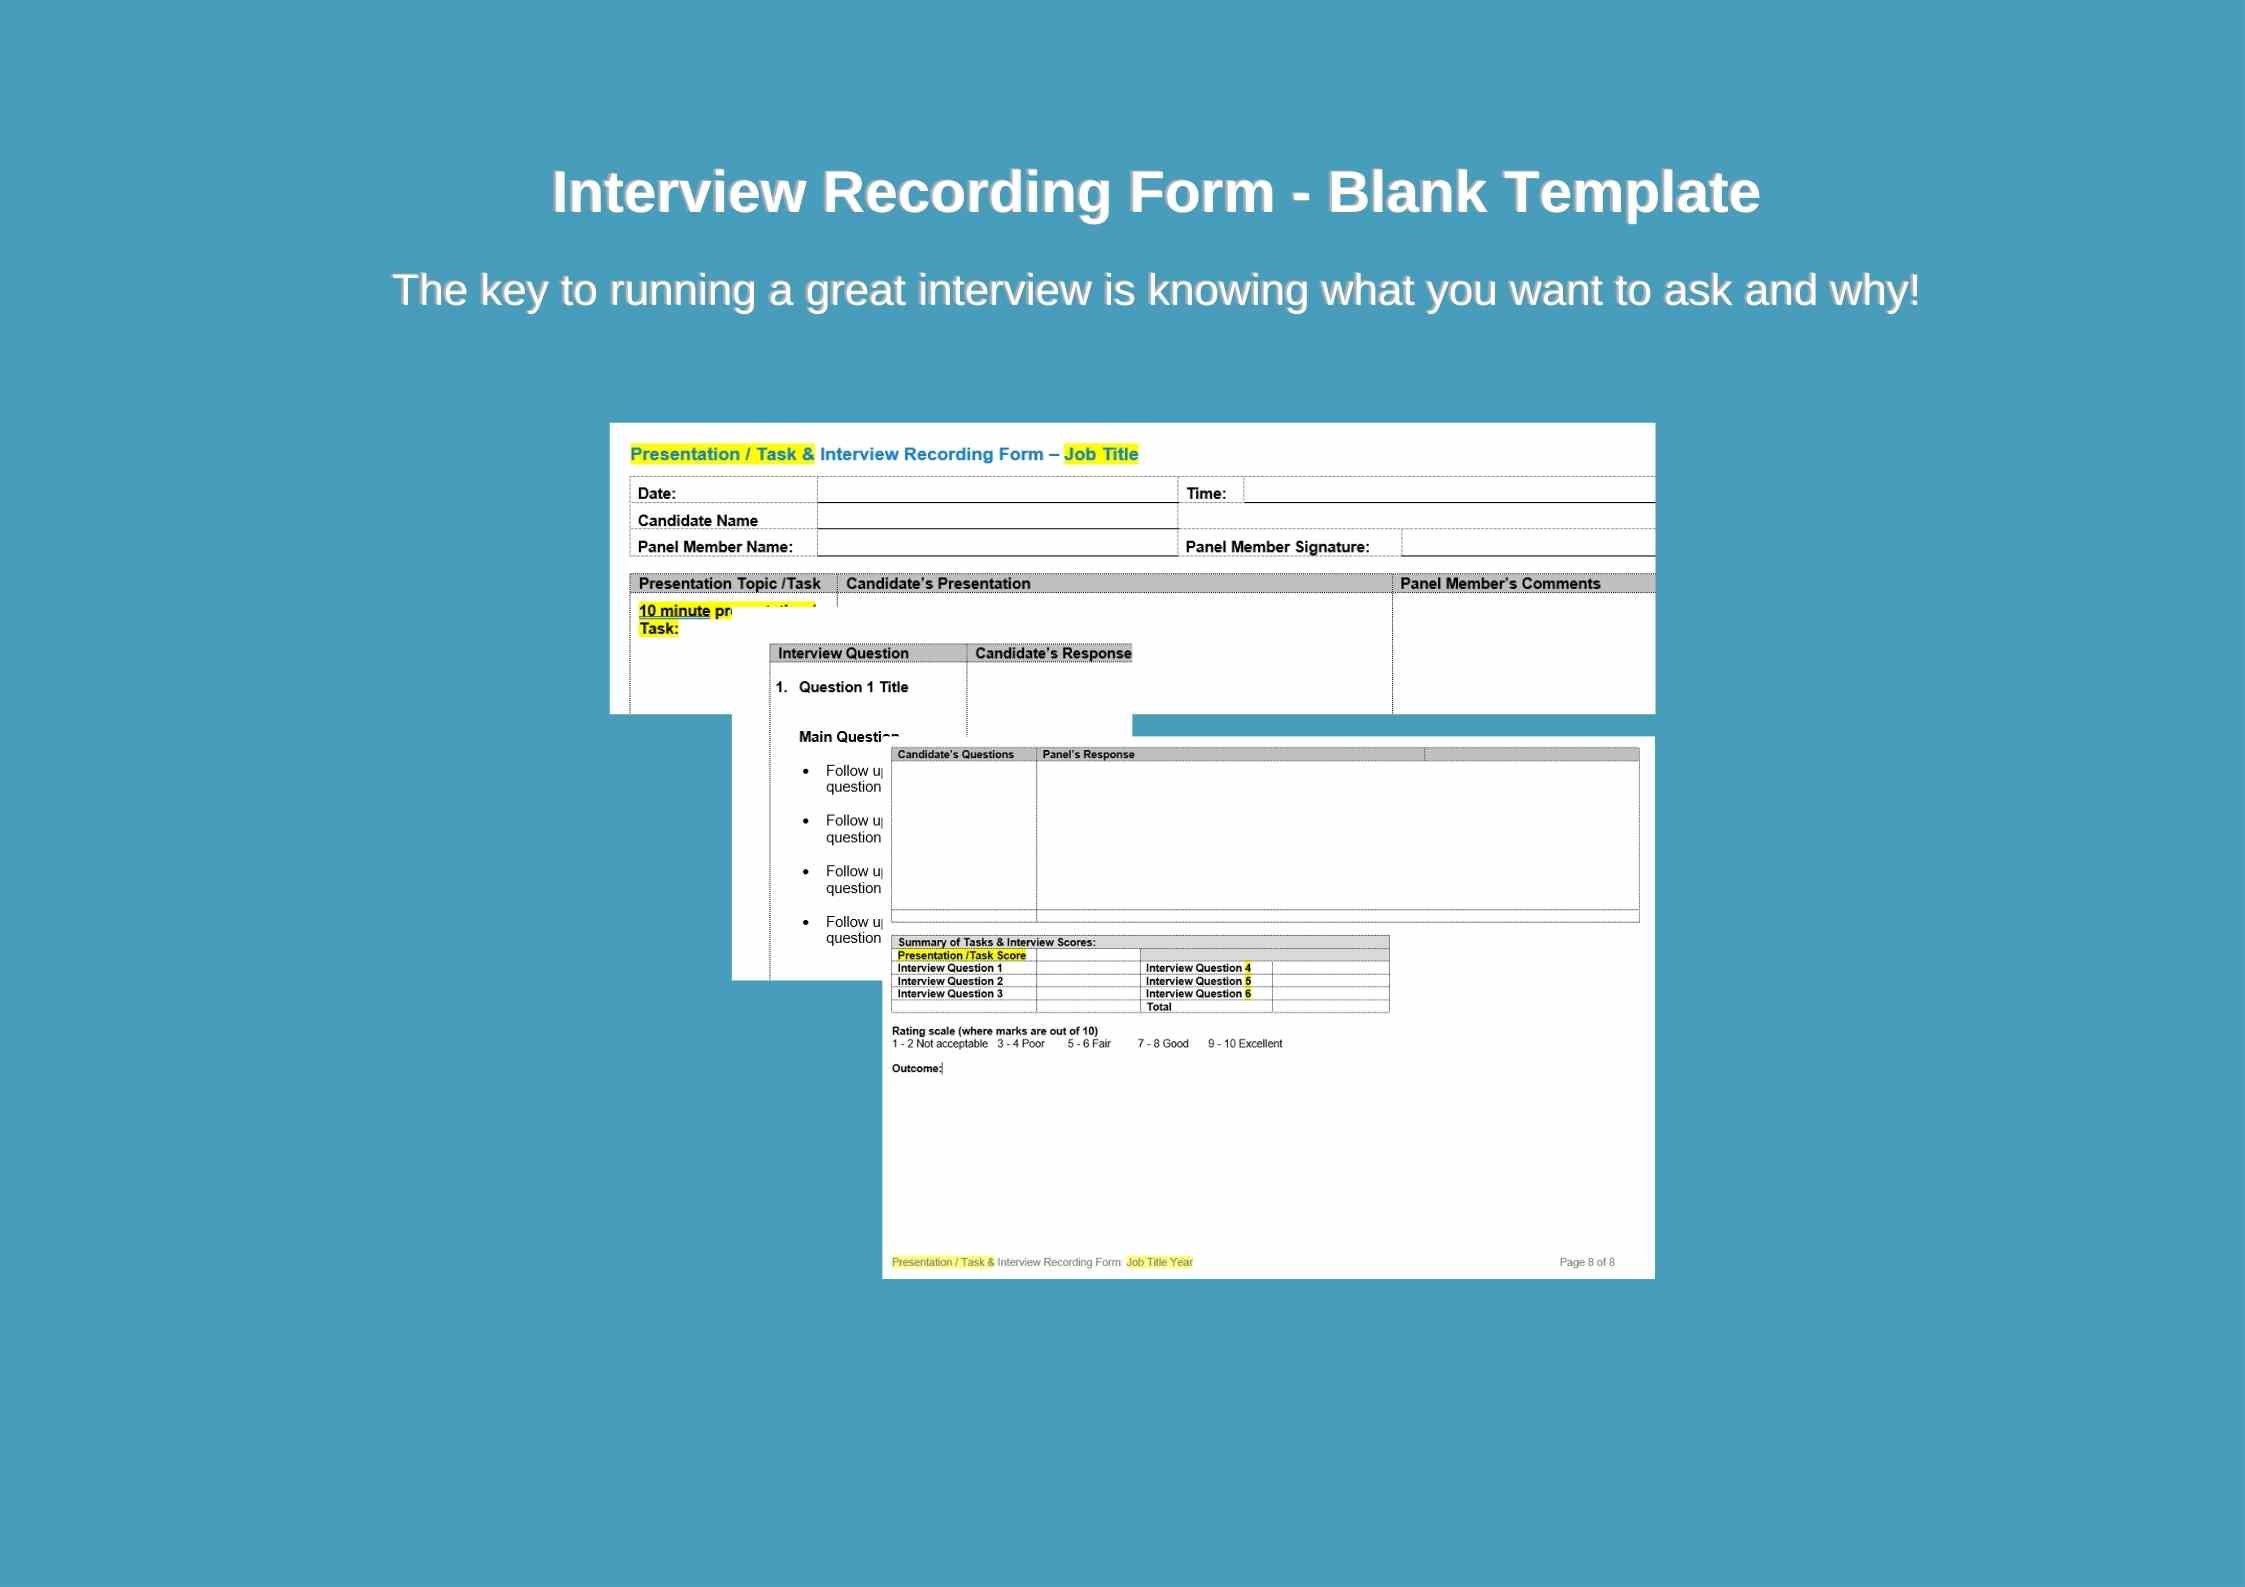 Job Interview Recording Form Blank Template - Etsy UK